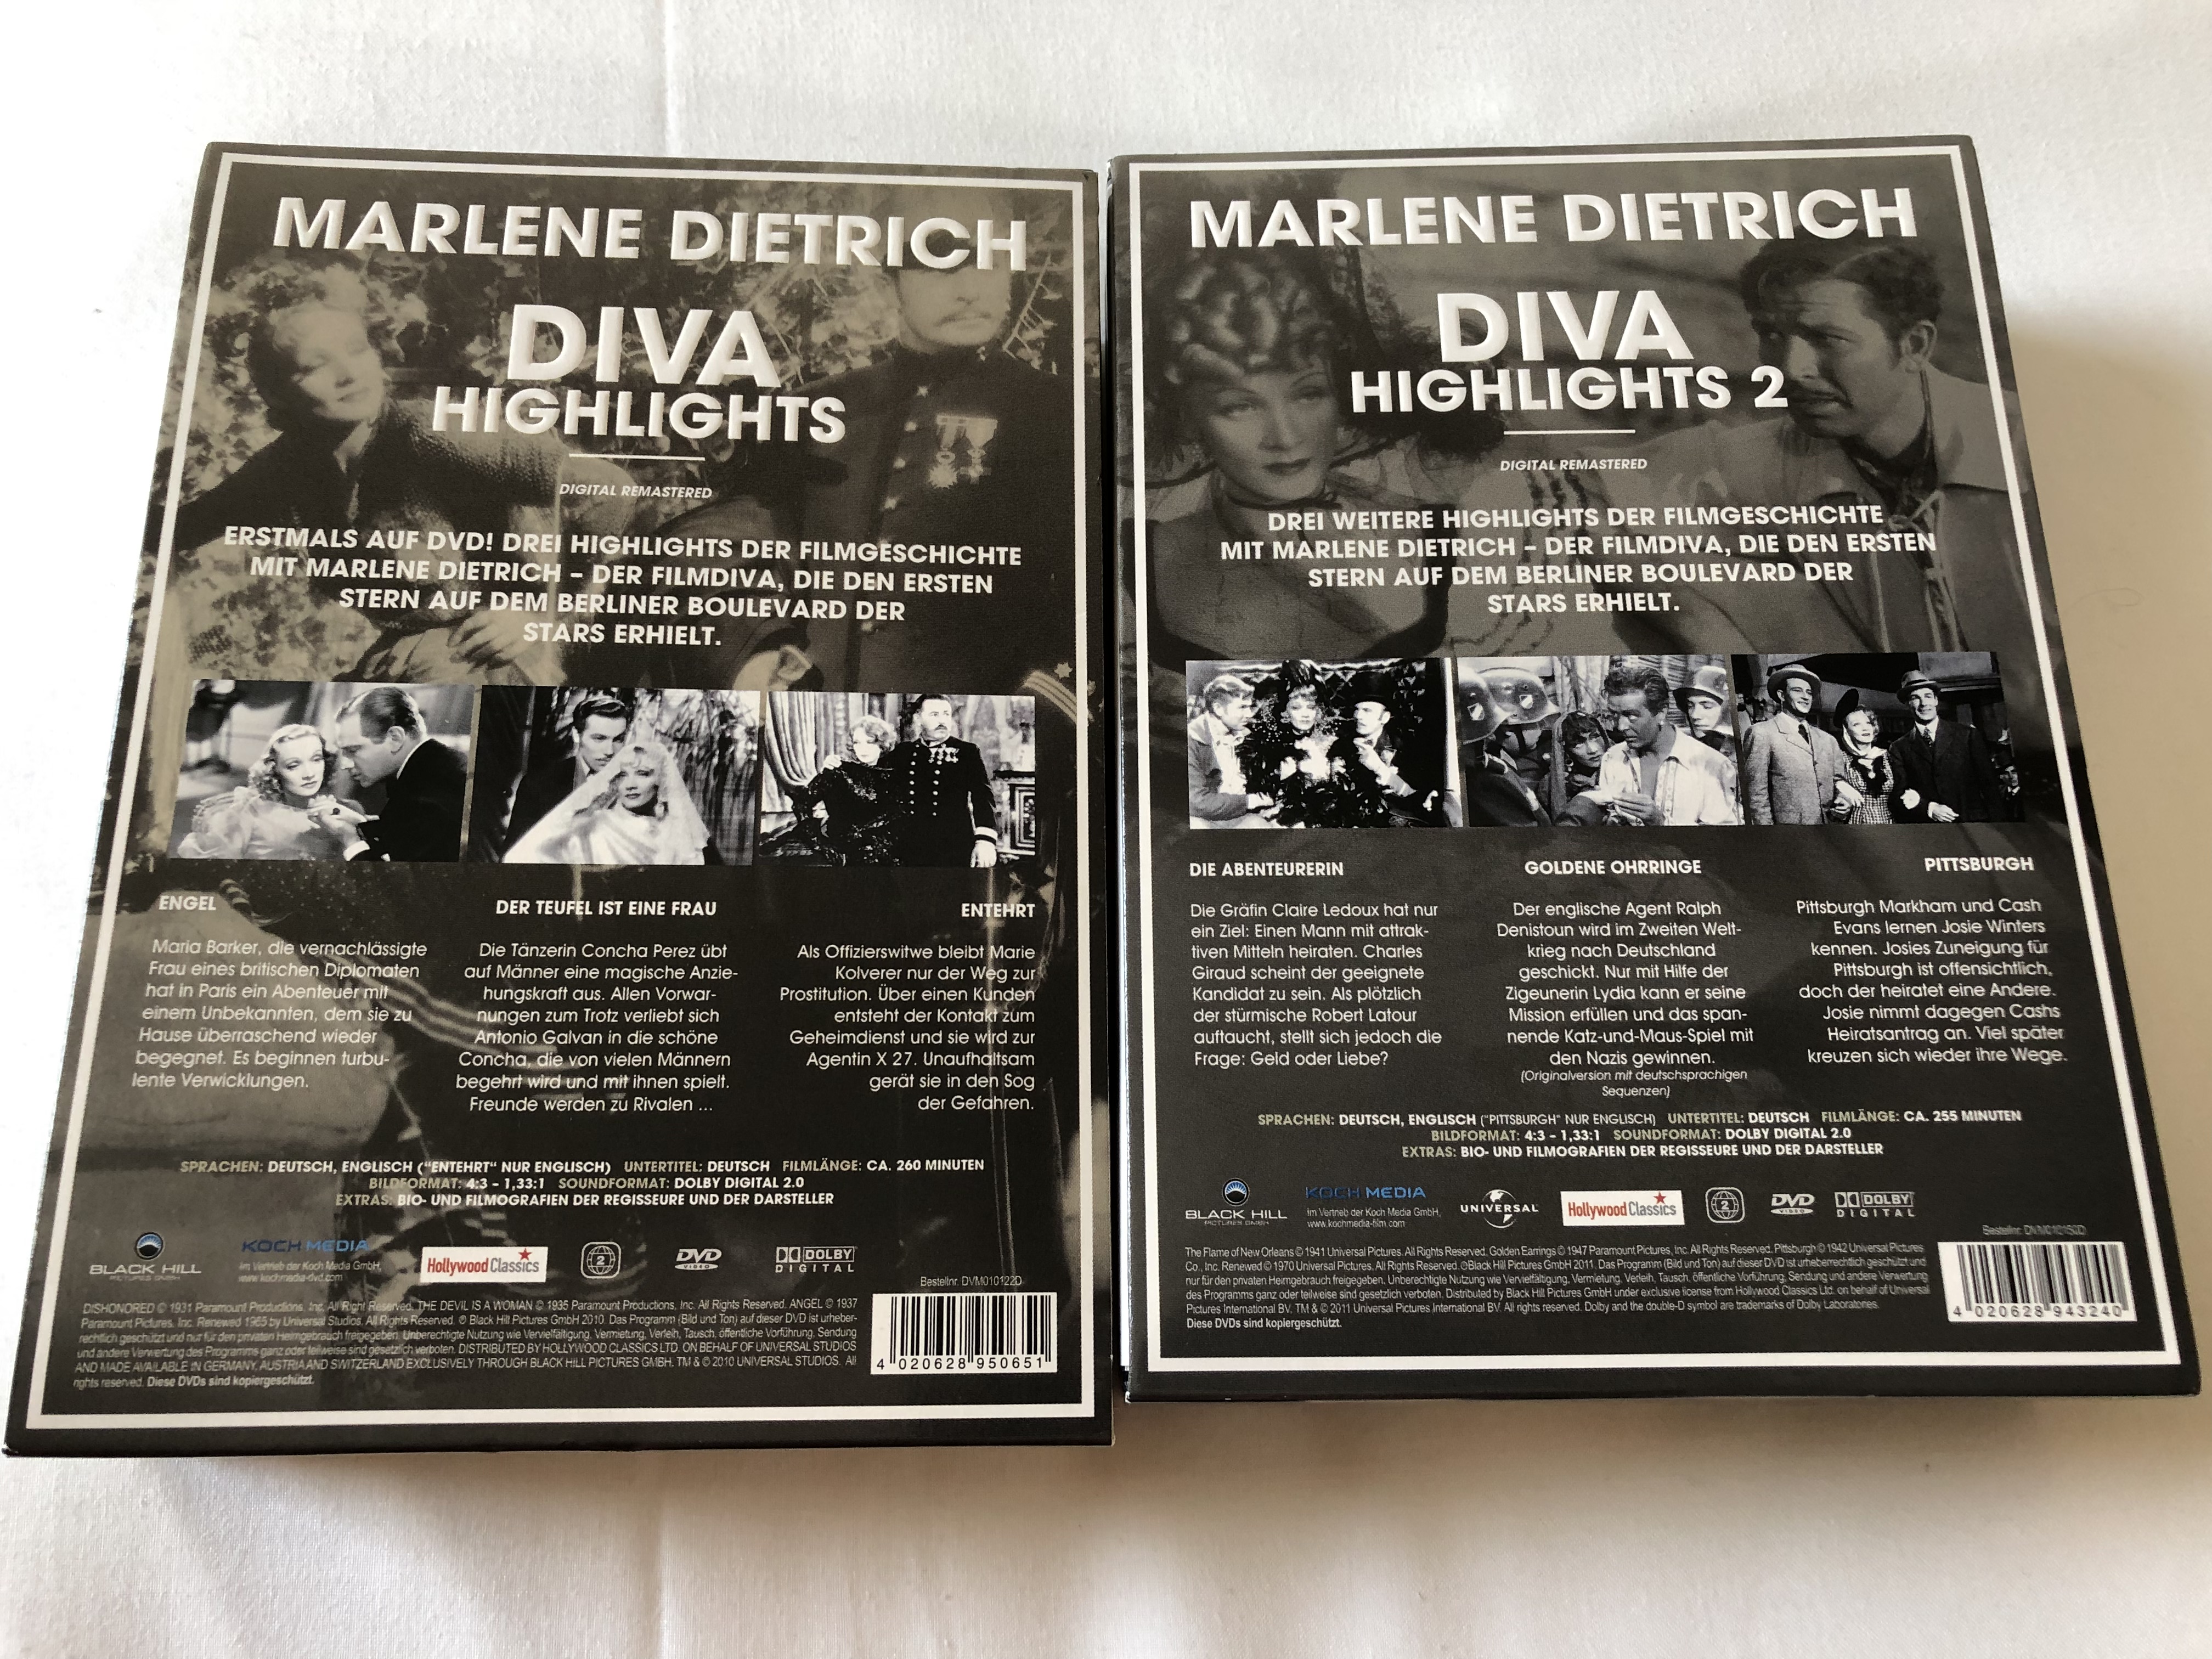 marlene-dietrich-diva-highlights-1-2-complete-dvd-set-6-highlights-black-white-classics-with-marlene-dietrich-the-film-diva-angel-the-devil-is-a-woman-dishonored-the-flame-of-new-orleans-golden-earring-pittsbur-6881395-.jpg